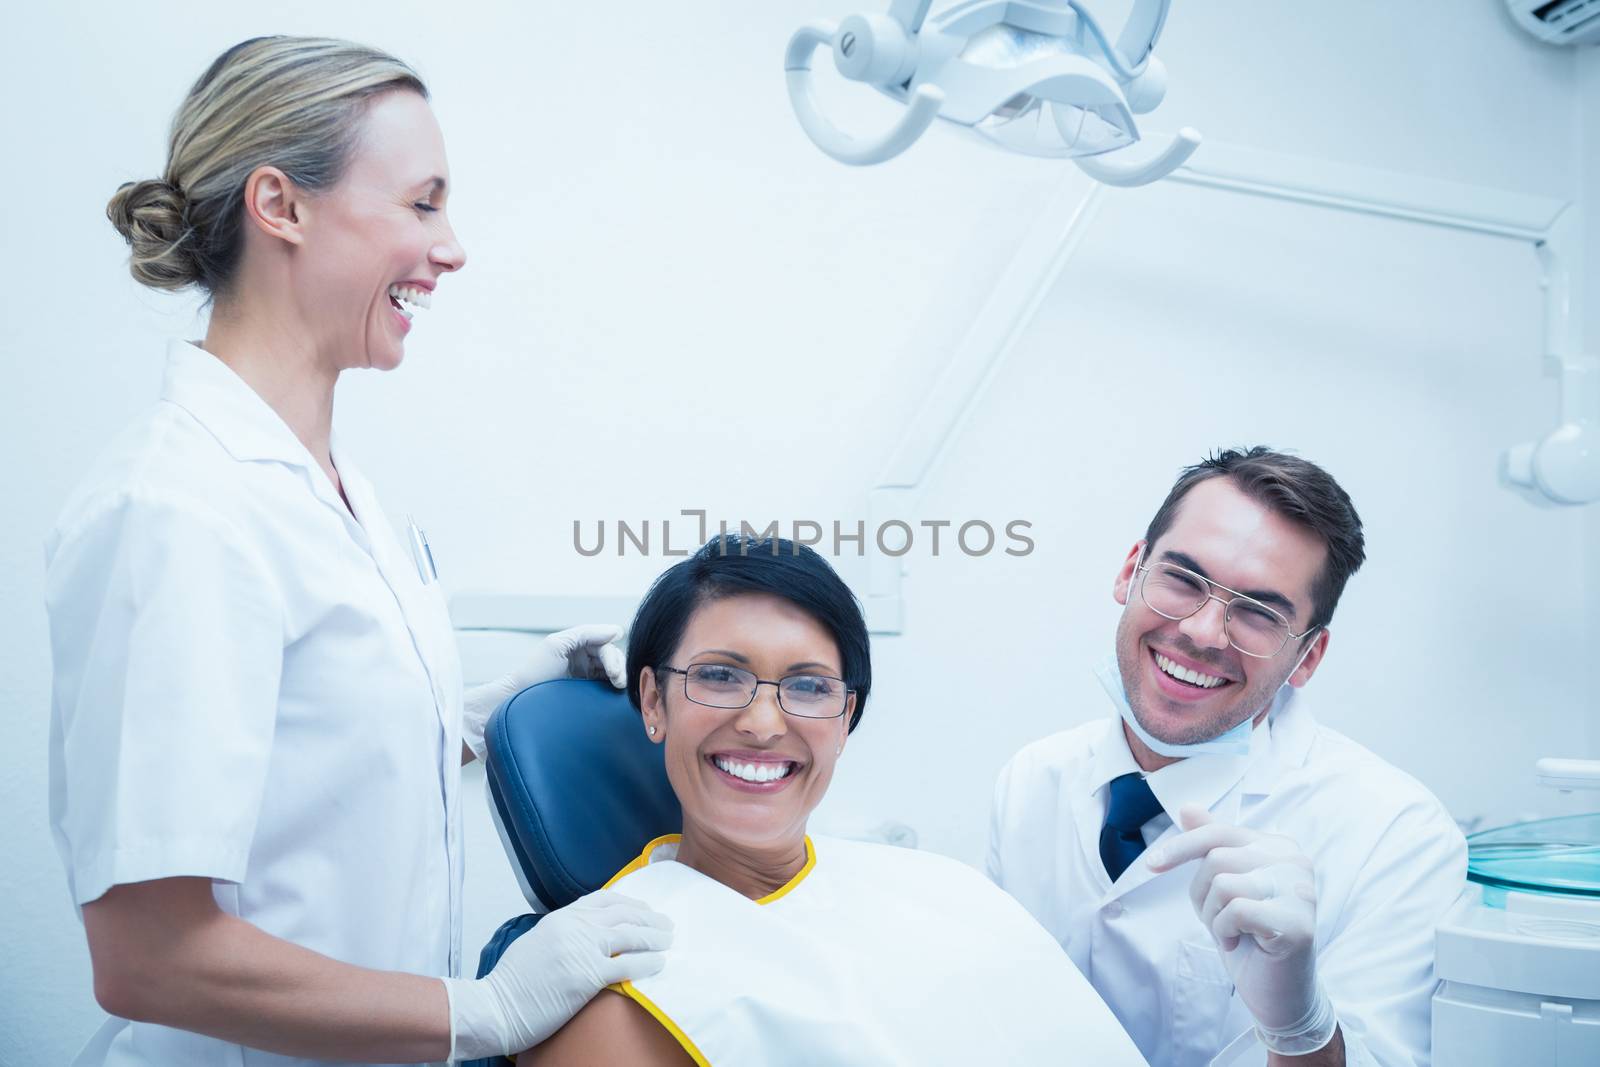 Portrait of cheerful male dentist and assistant with female patient in the dentists chair